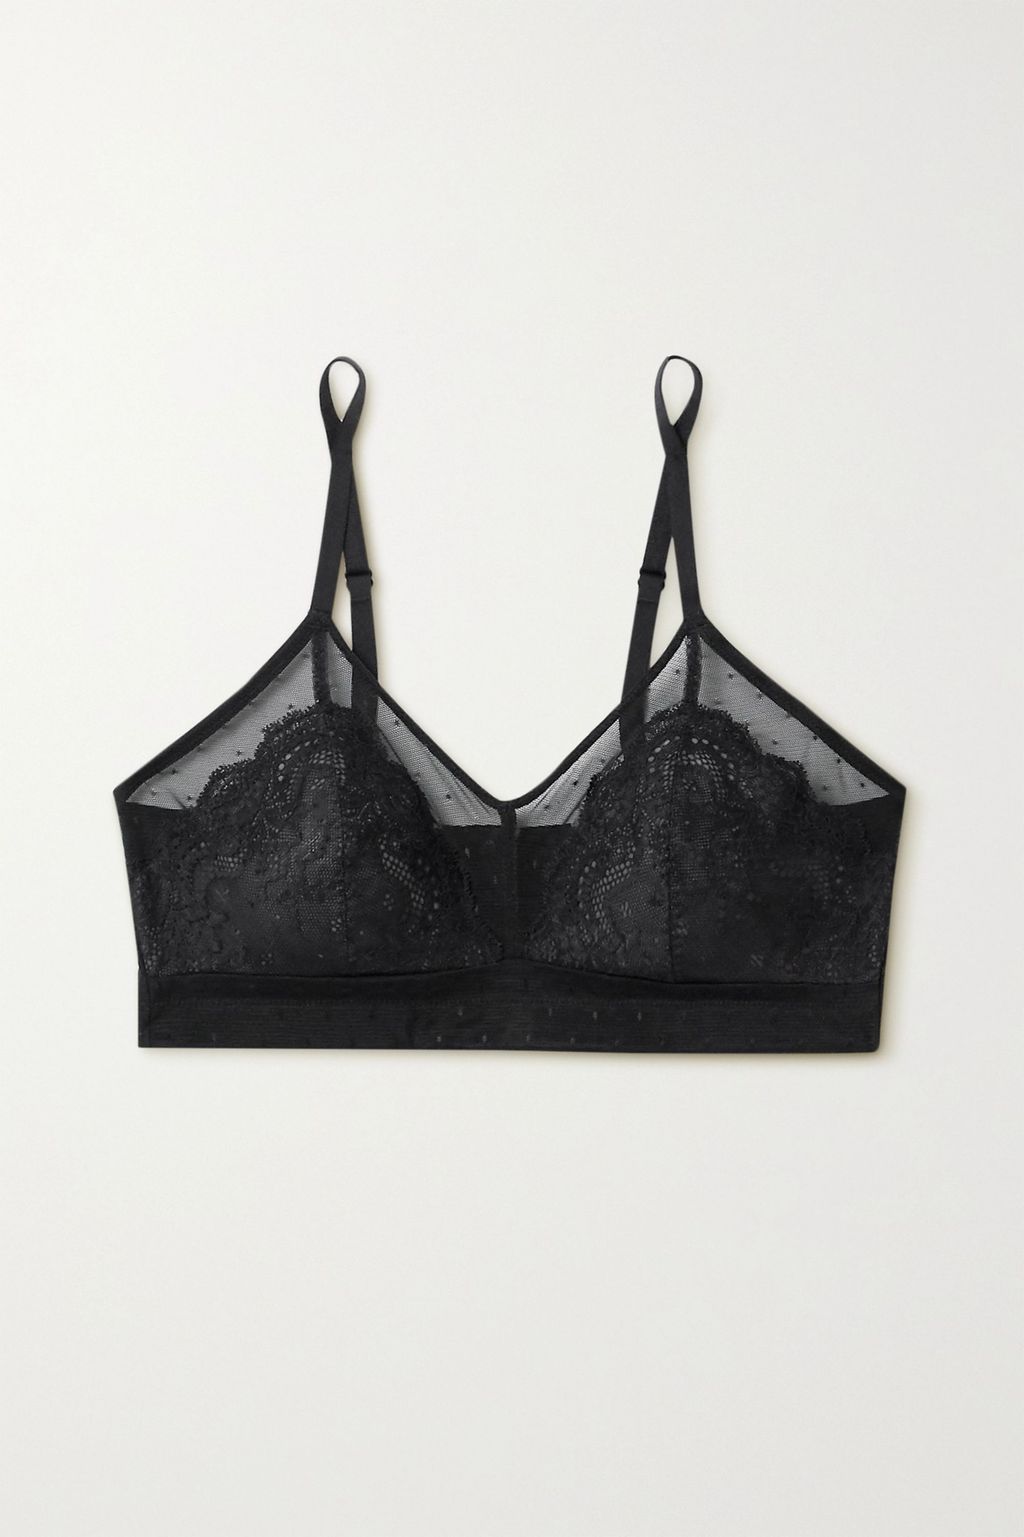 7 Cute Bra-and-Panty Sets That Are So Trendy | Who What Wear